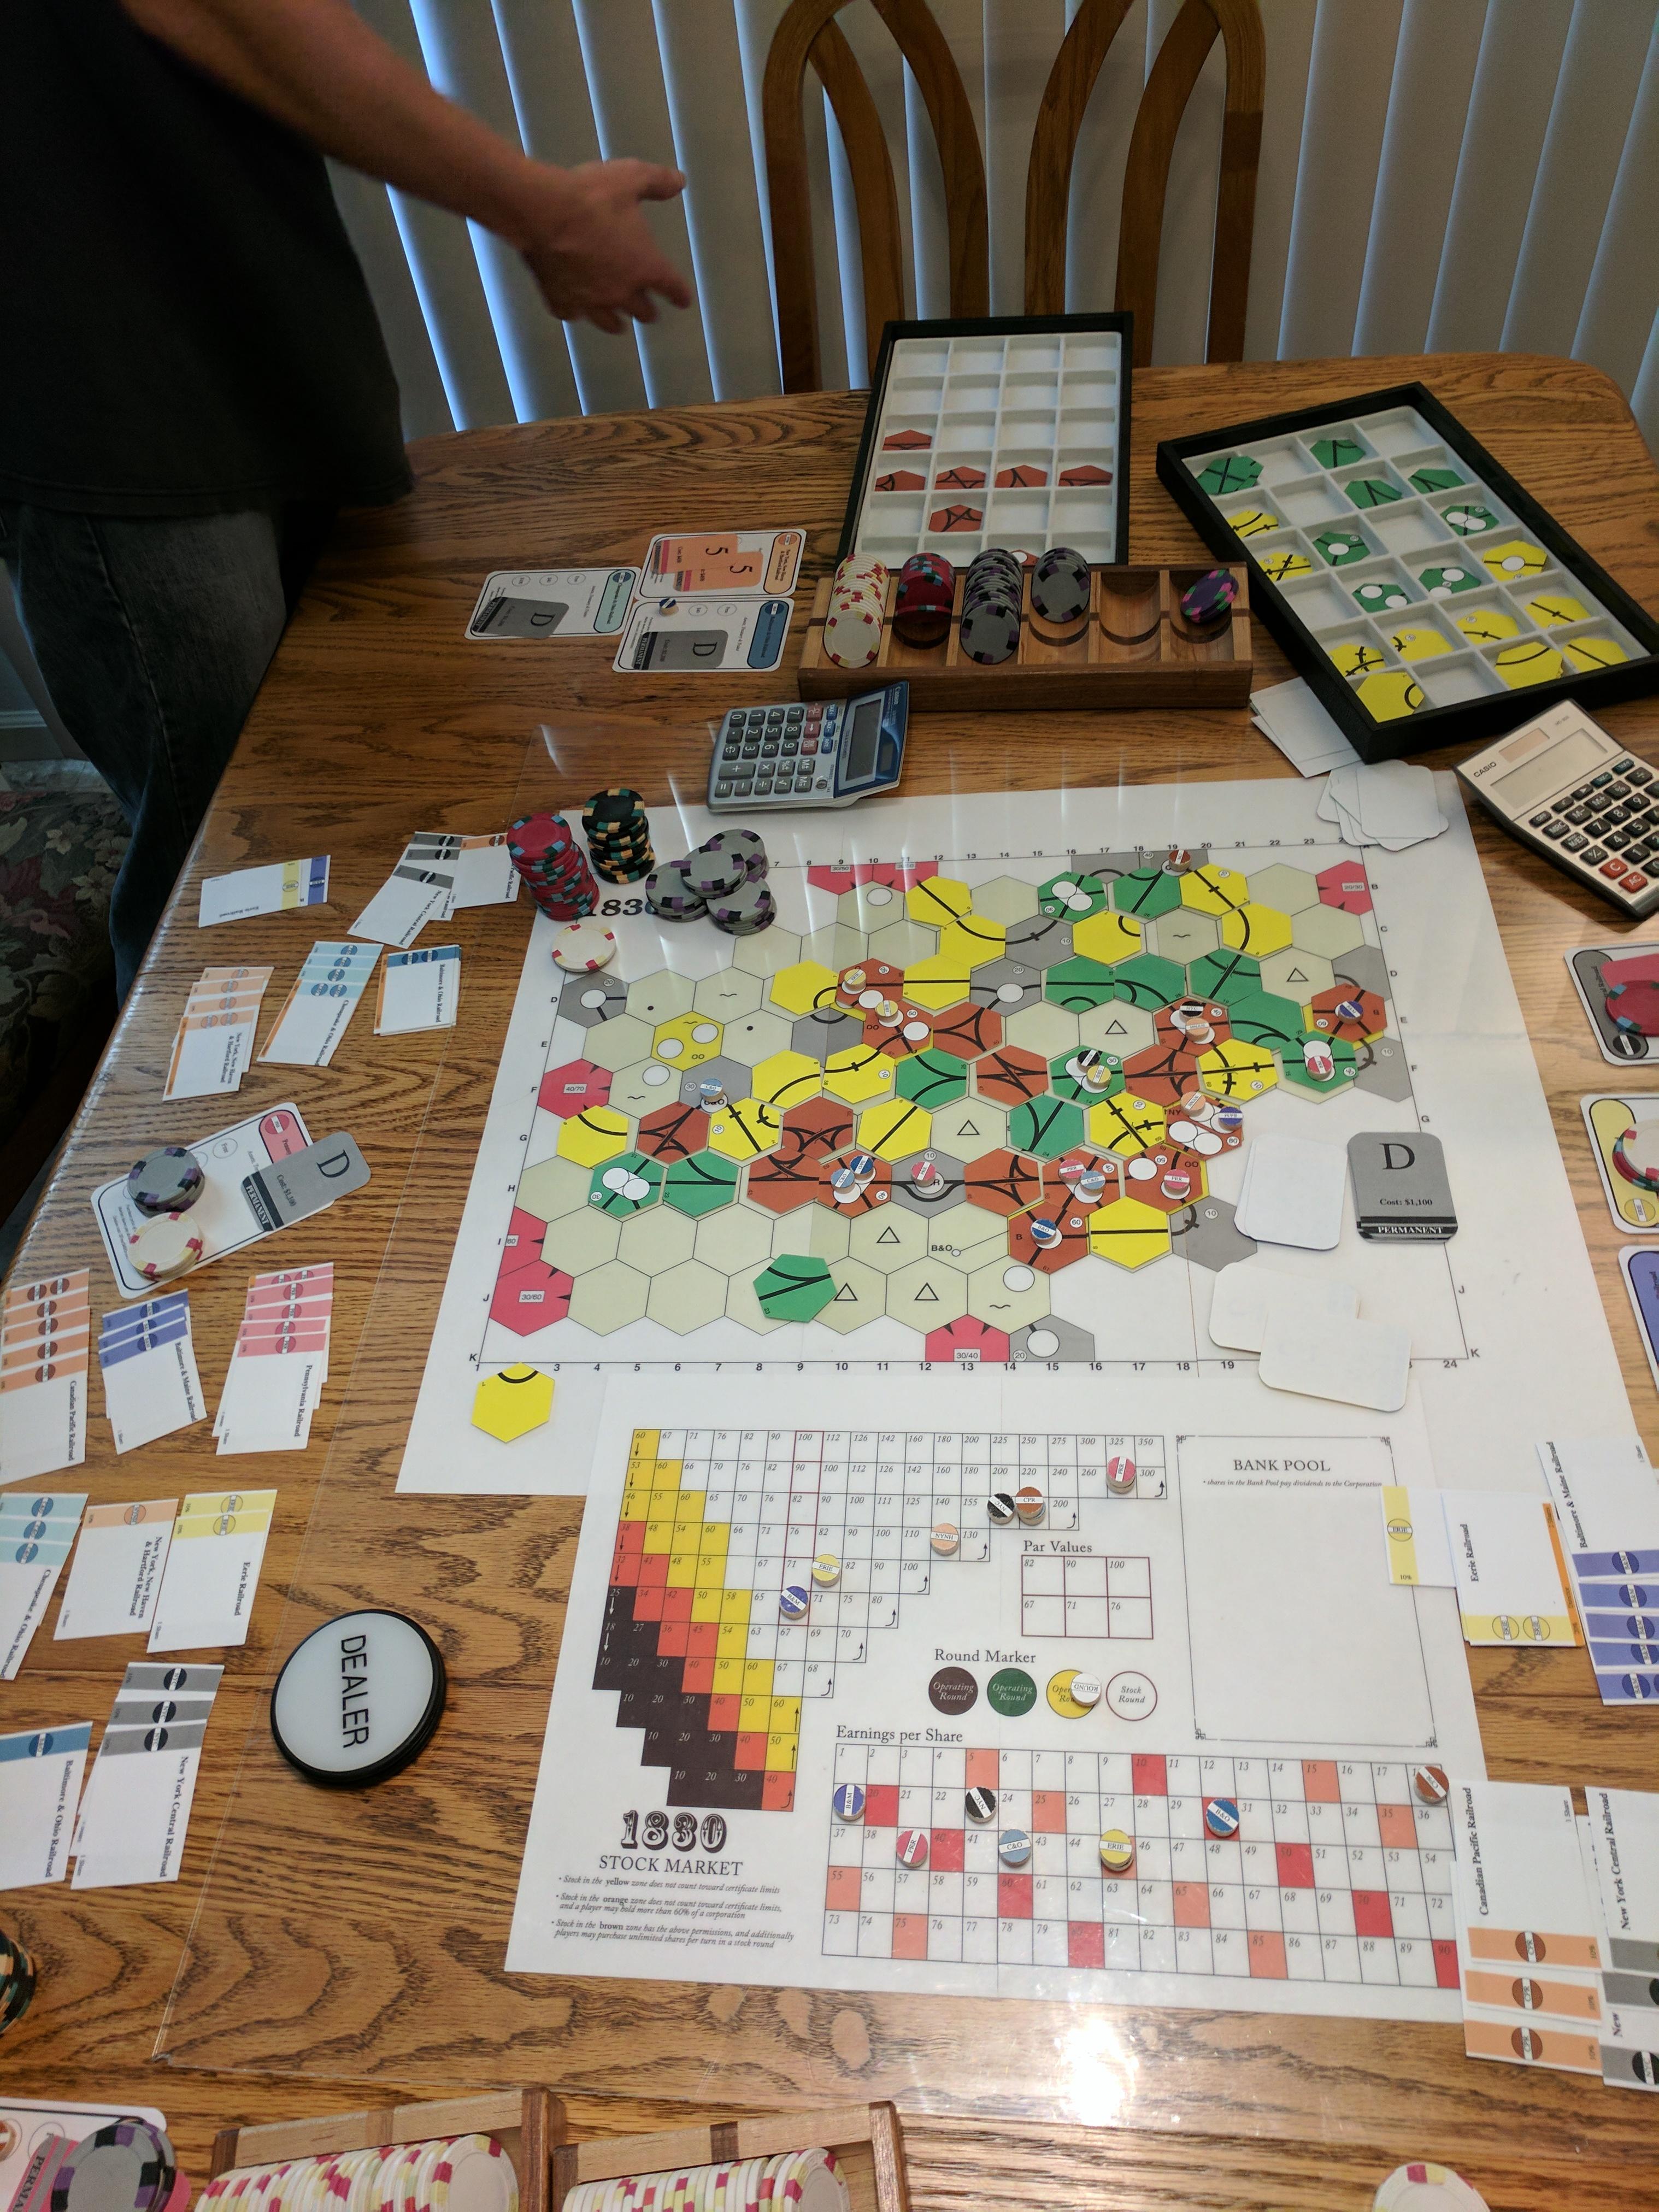 End of a 3-player game